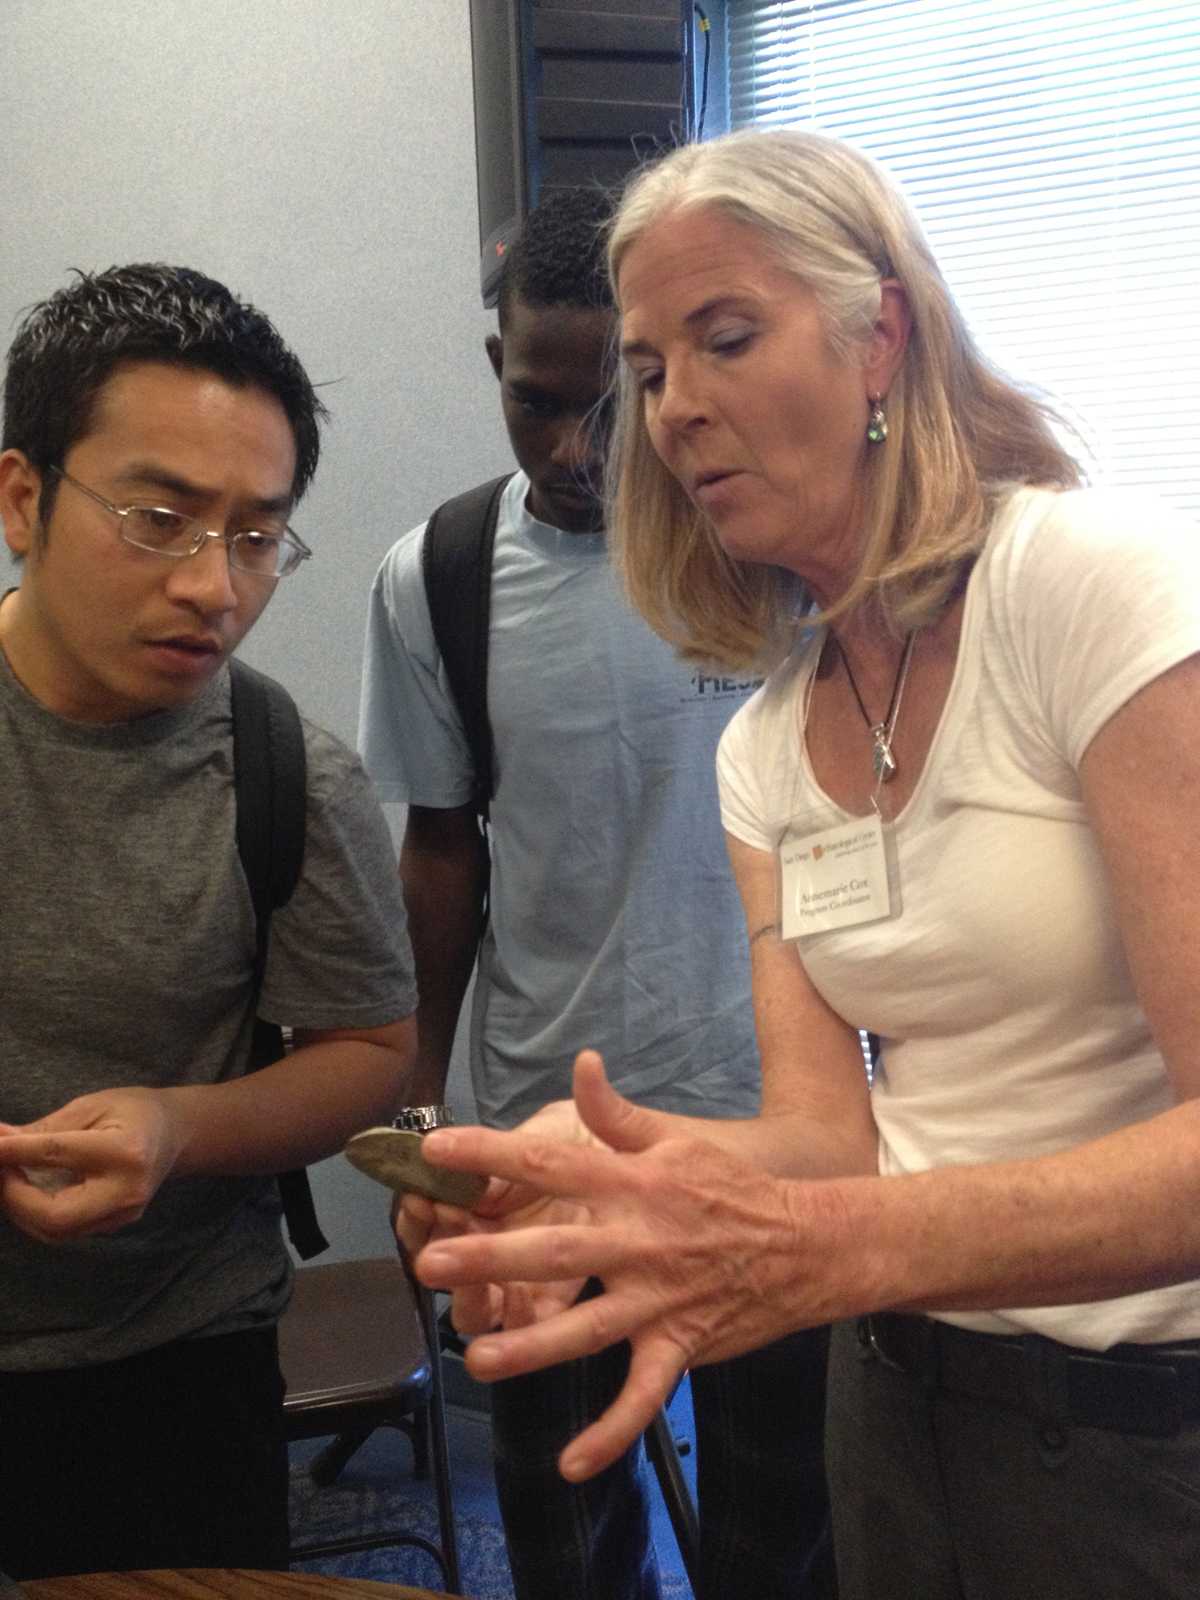 Program coordinator Annemarie Cox shows students a flint from a dig site in San Diego after her presentation on April 3.  Mariel Mostacero, City Times